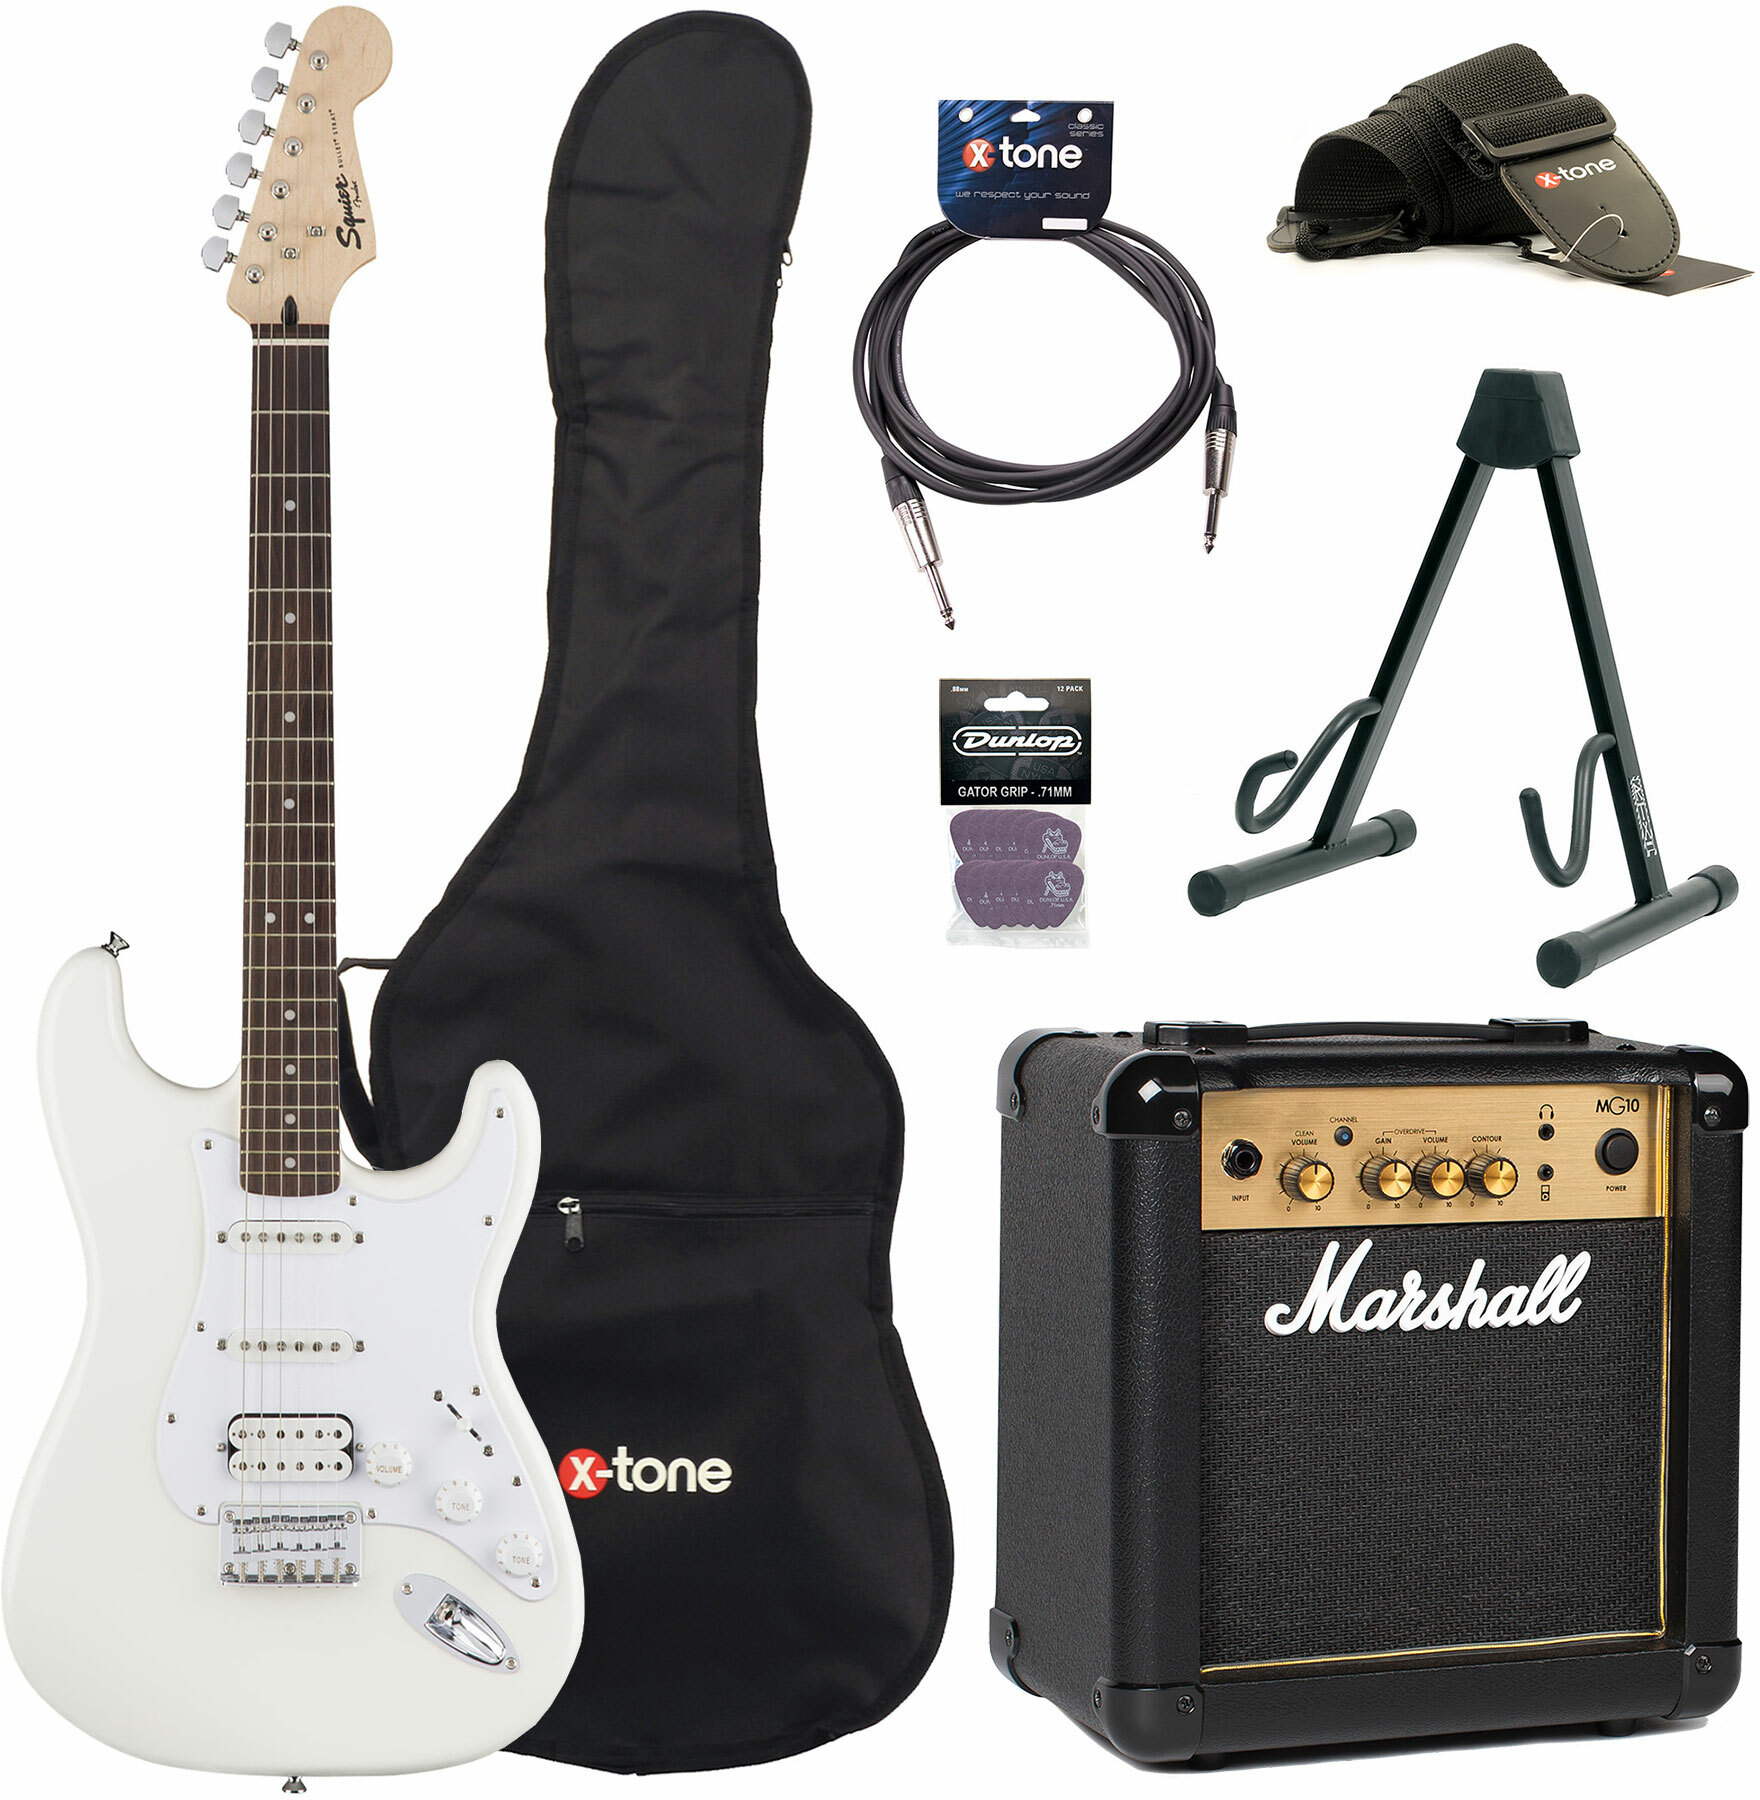 Squier Strat Bullet Ht Hss + Marshall Mg10g + Access X-tone - Arctic White - Packs guitarra eléctrica - Main picture